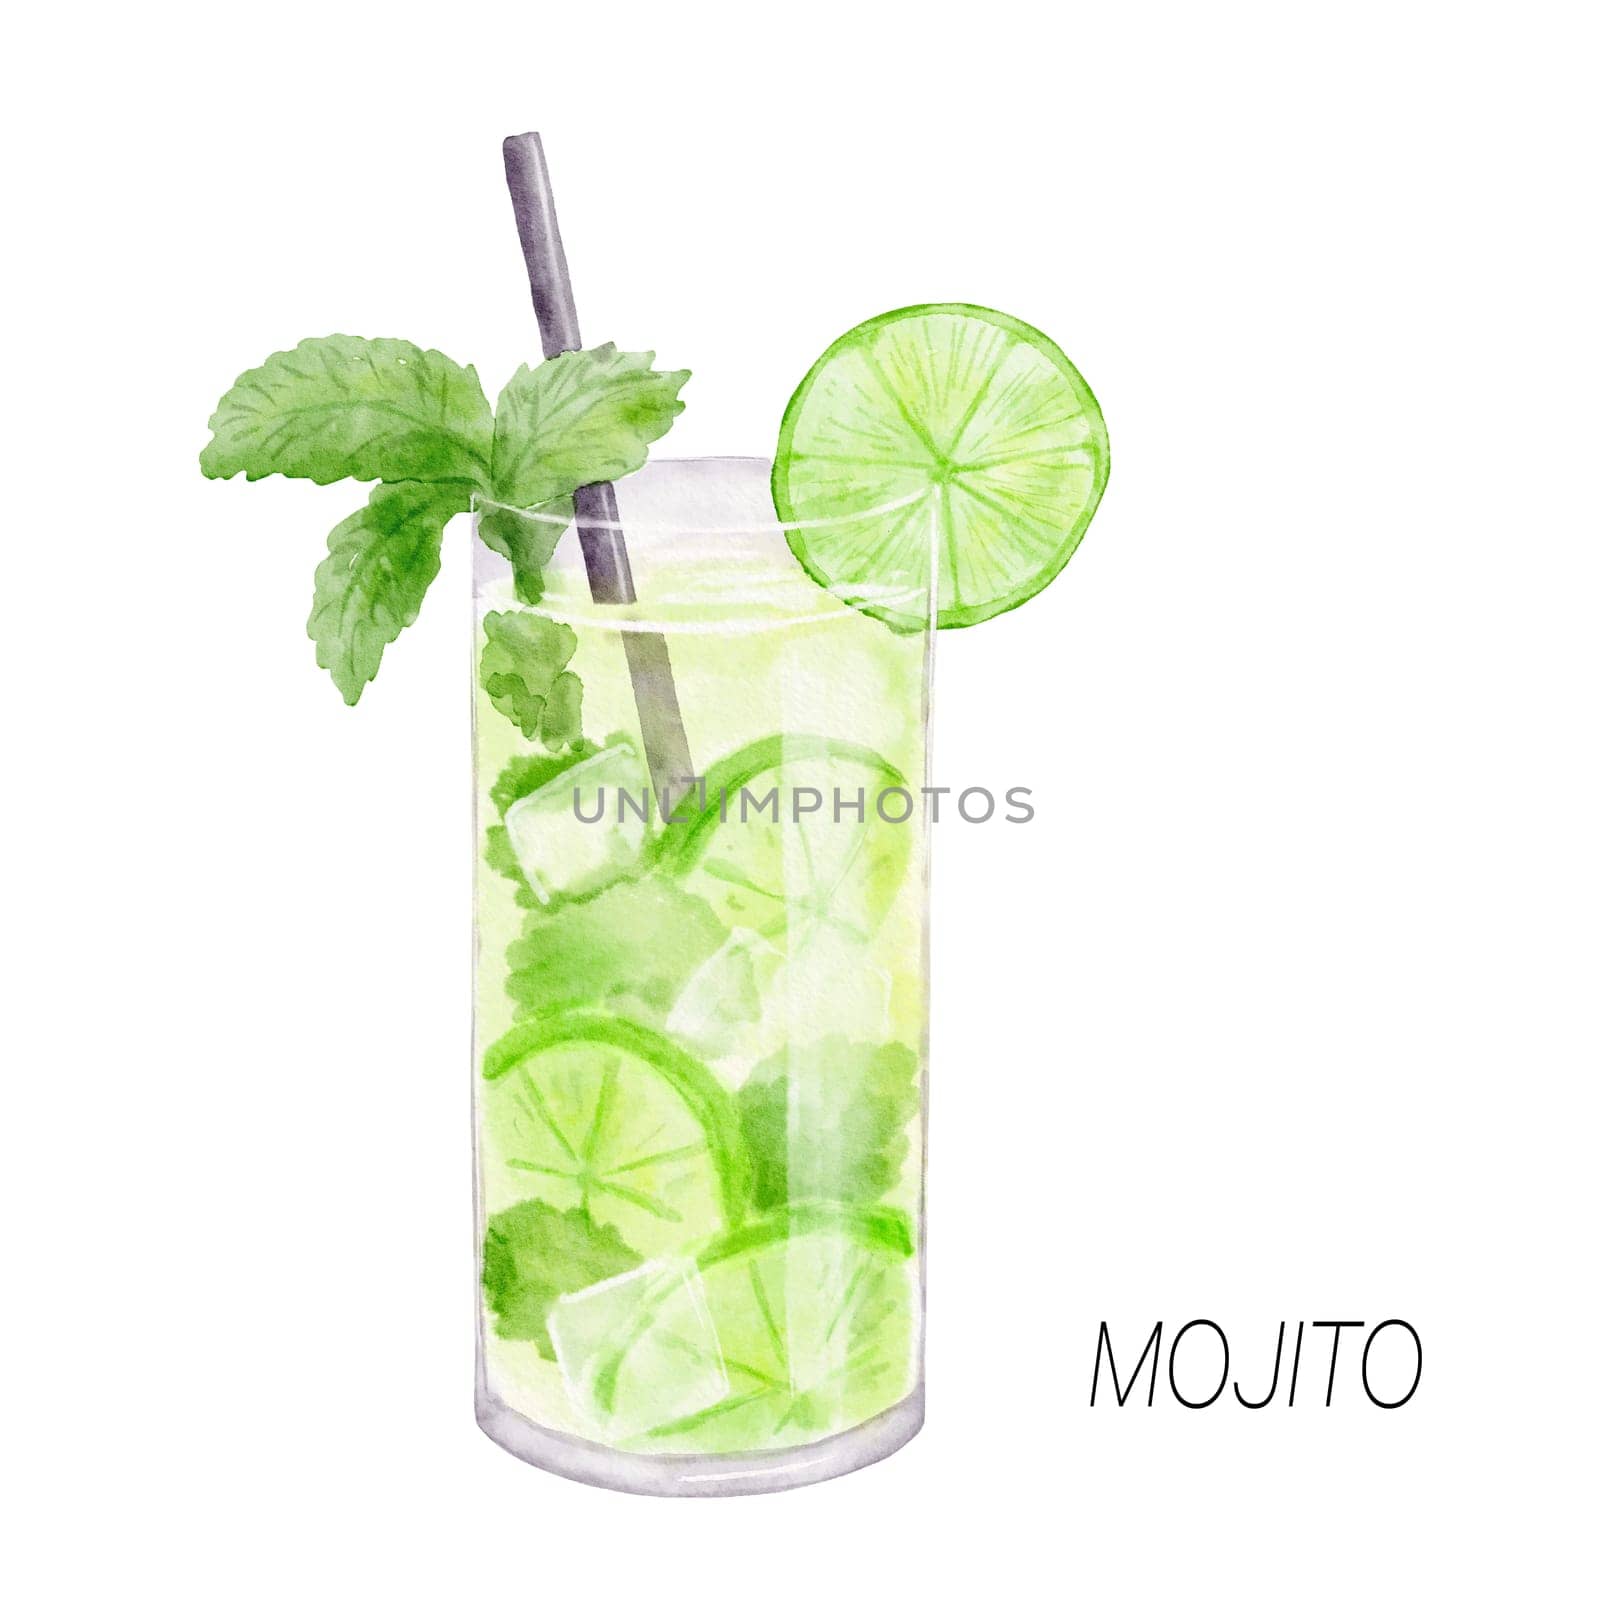 Mojito cocktail. Watercolor illustration of drink in glass isolated on white by ElenaPlatova